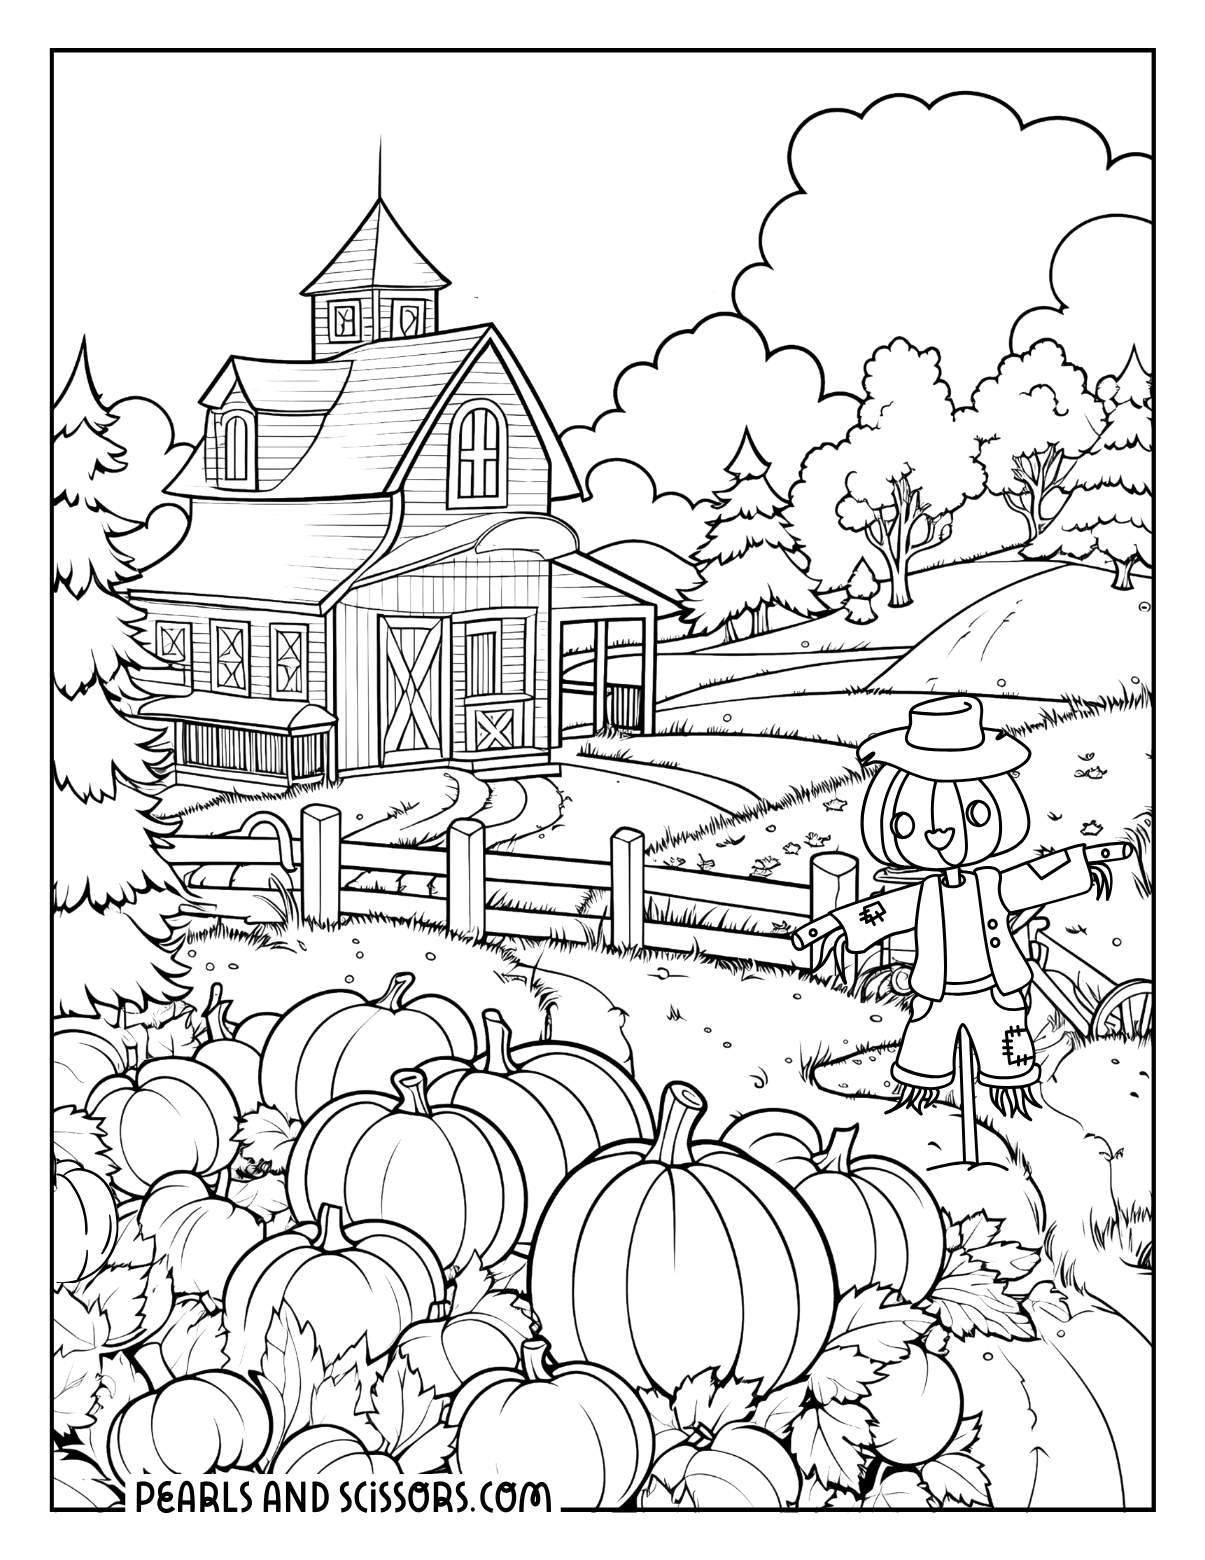 Pumpkin harvest farm with a scarecrow coloring page for adults.